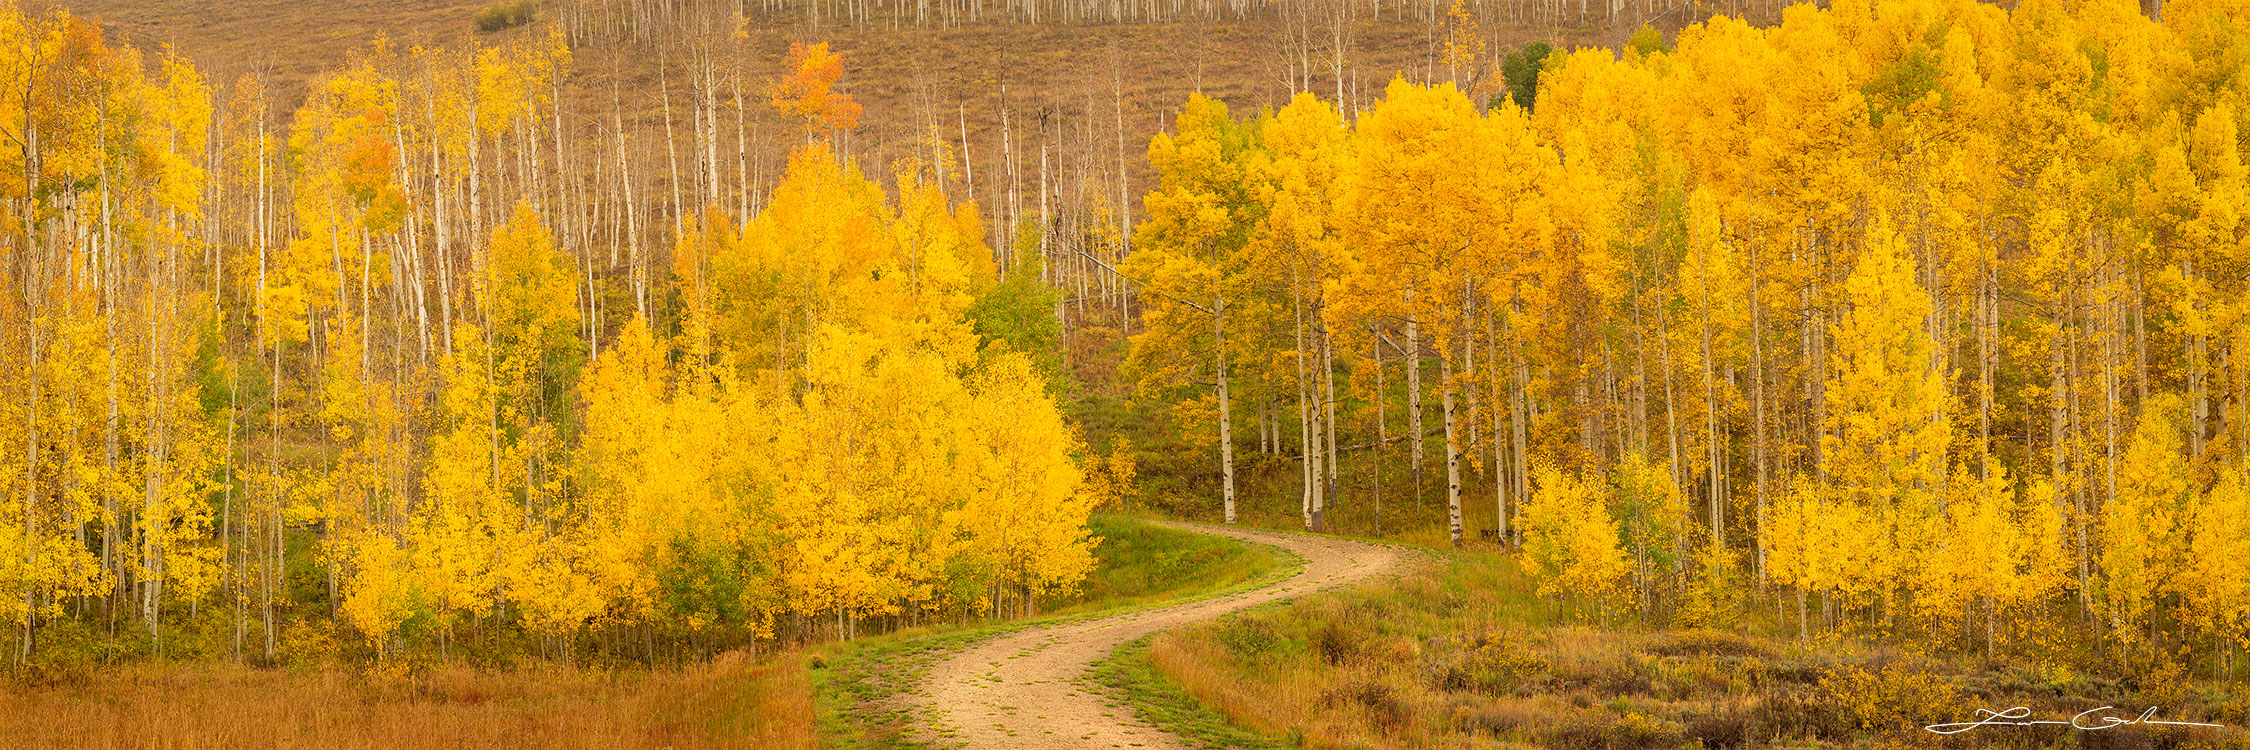 A small country road meanders and enigmatically disappears into the golden aspens - Gintchin Fine Art